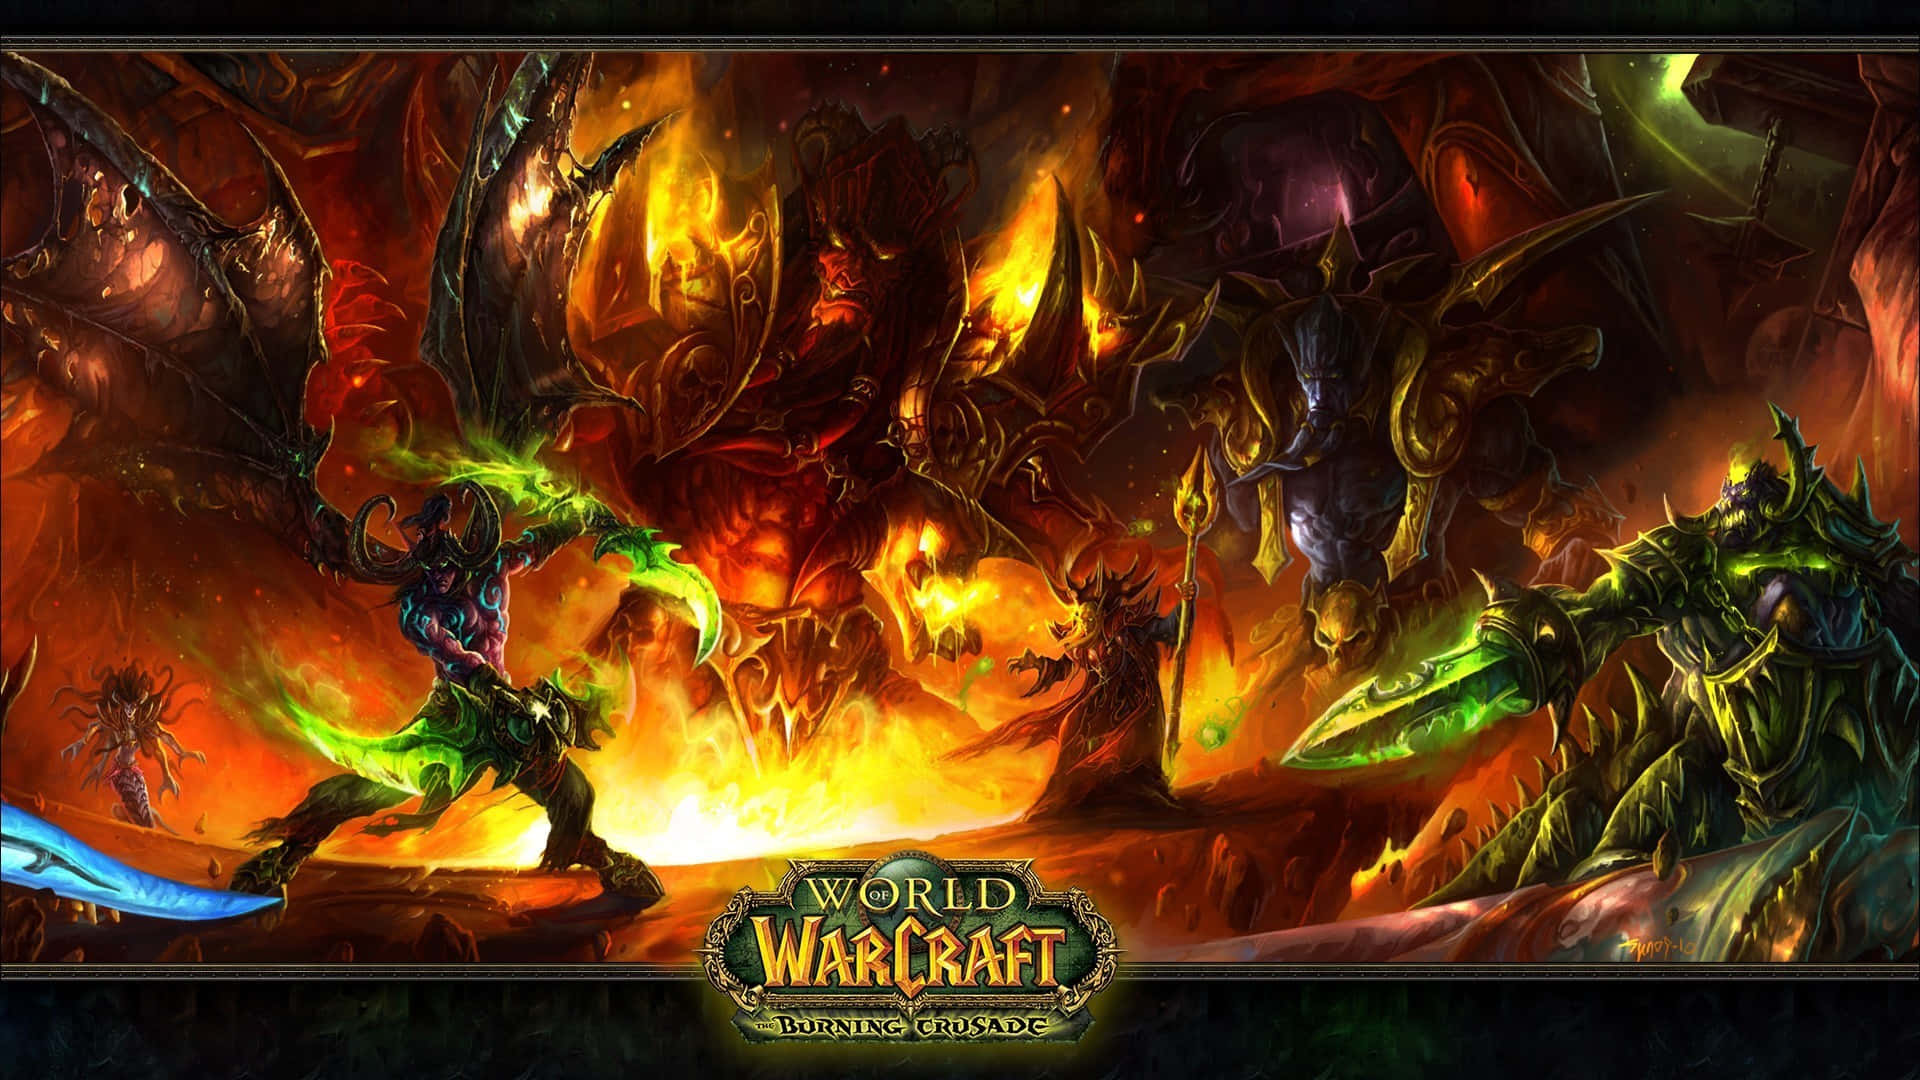 "Take on the World of Warcraft" Wallpaper